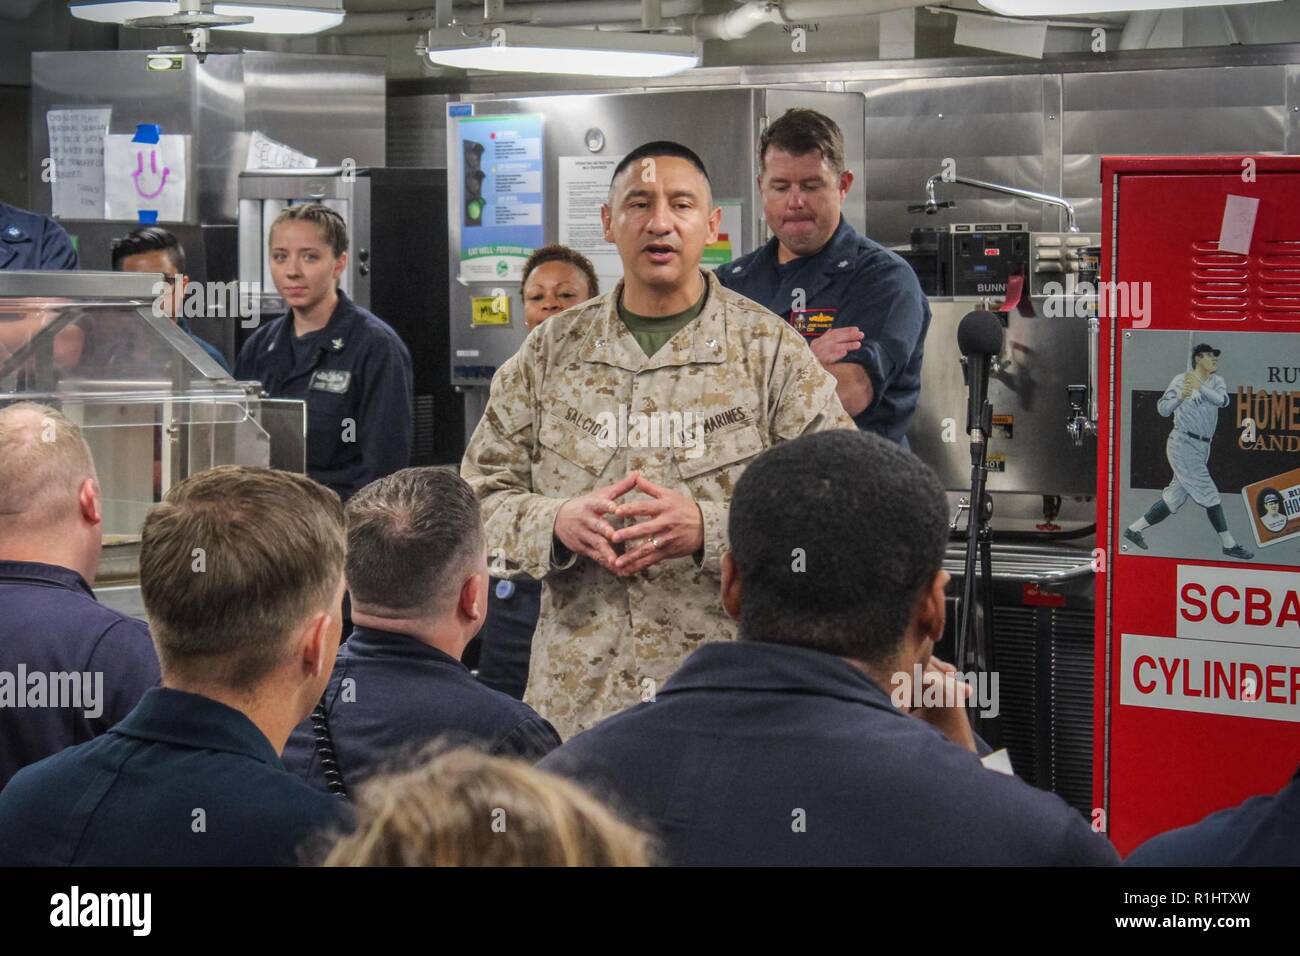 U.S. 5TH FLEET AREA OF OPERATIONS (Sept. 20, 2018) Marine Lt. Col. Rudy Salcido, operations officer for the 13th Marine Expeditionary Unit, speaks to Sailors aboard the guided-missile destroyer USS Jason Dunham (DDG 109). Salcido and Cpl. Jason Dunham were together in Kilo Company, 3rd Battalion, 7th Marines, during the Iraq War when Dunham was killed in action. USS Jason Dunham is deployed to the U.S. 5th Fleet area of operations in support of naval operations to ensure maritime stability and security in the Central Region, connecting the Mediterranean and the Pacific through the western Indi Stock Photo